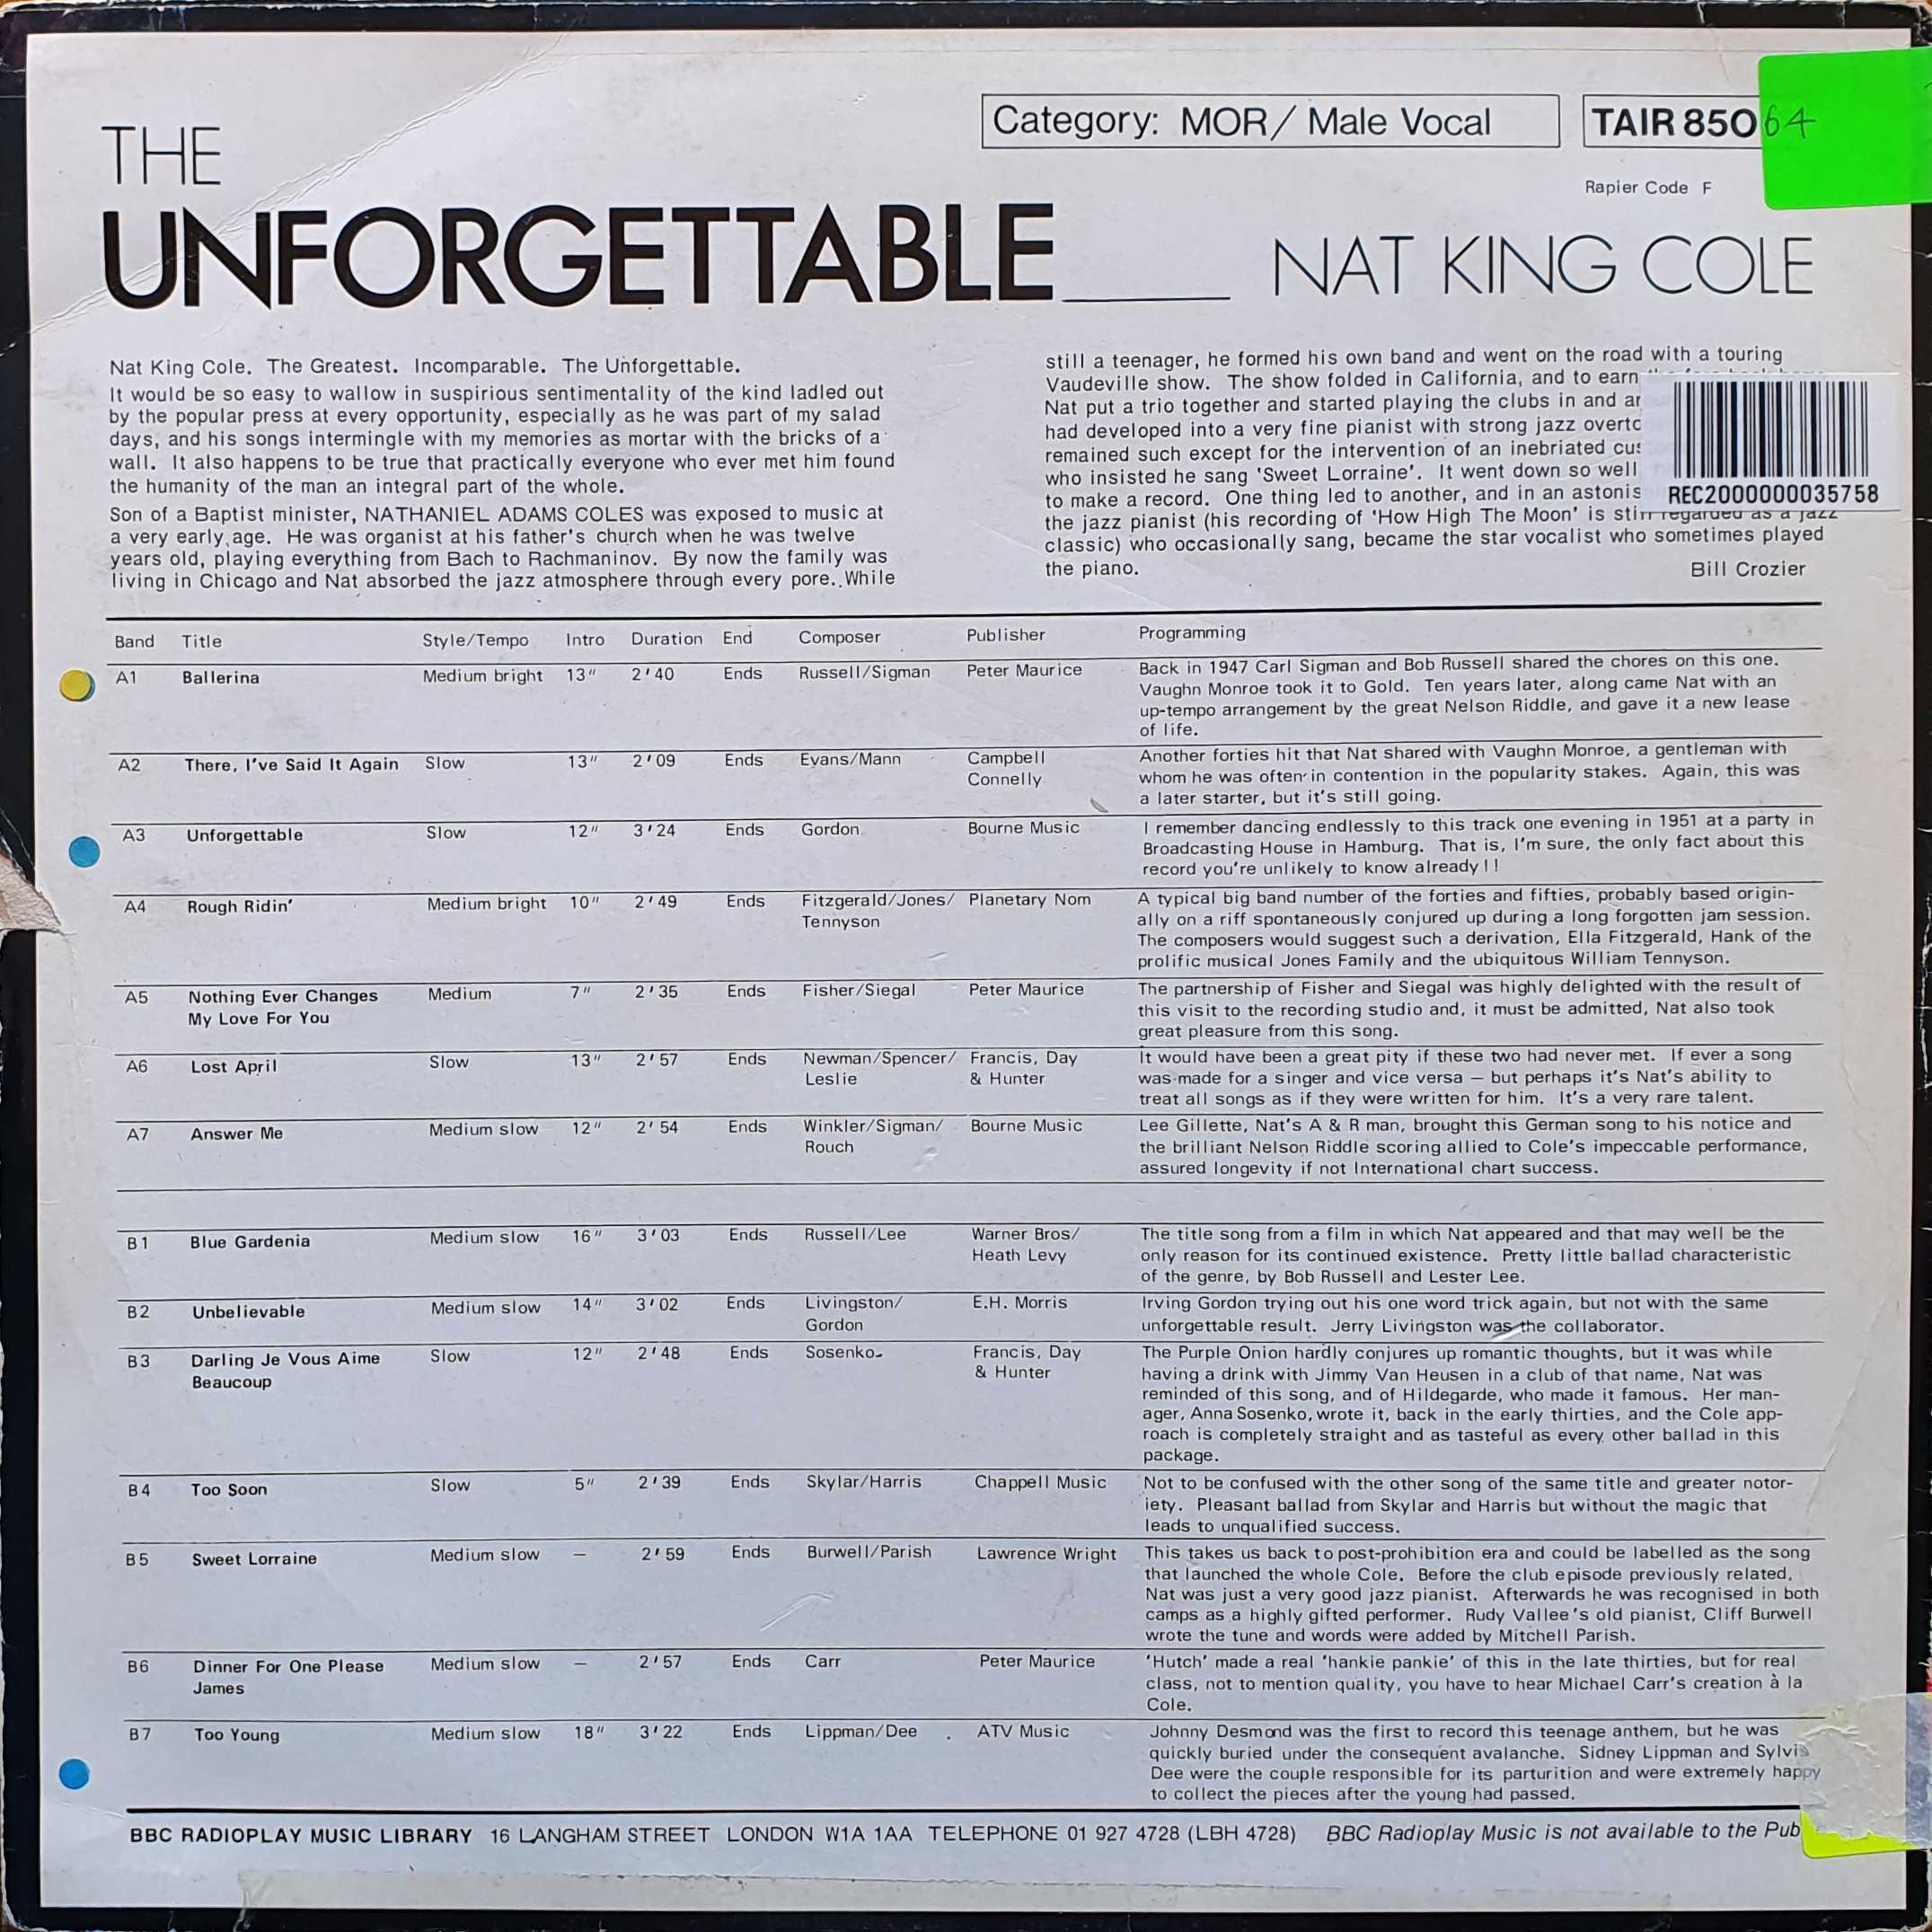 Picture of TAIR 85064 The unforgettable by artist Nat King Cole from the BBC records and Tapes library